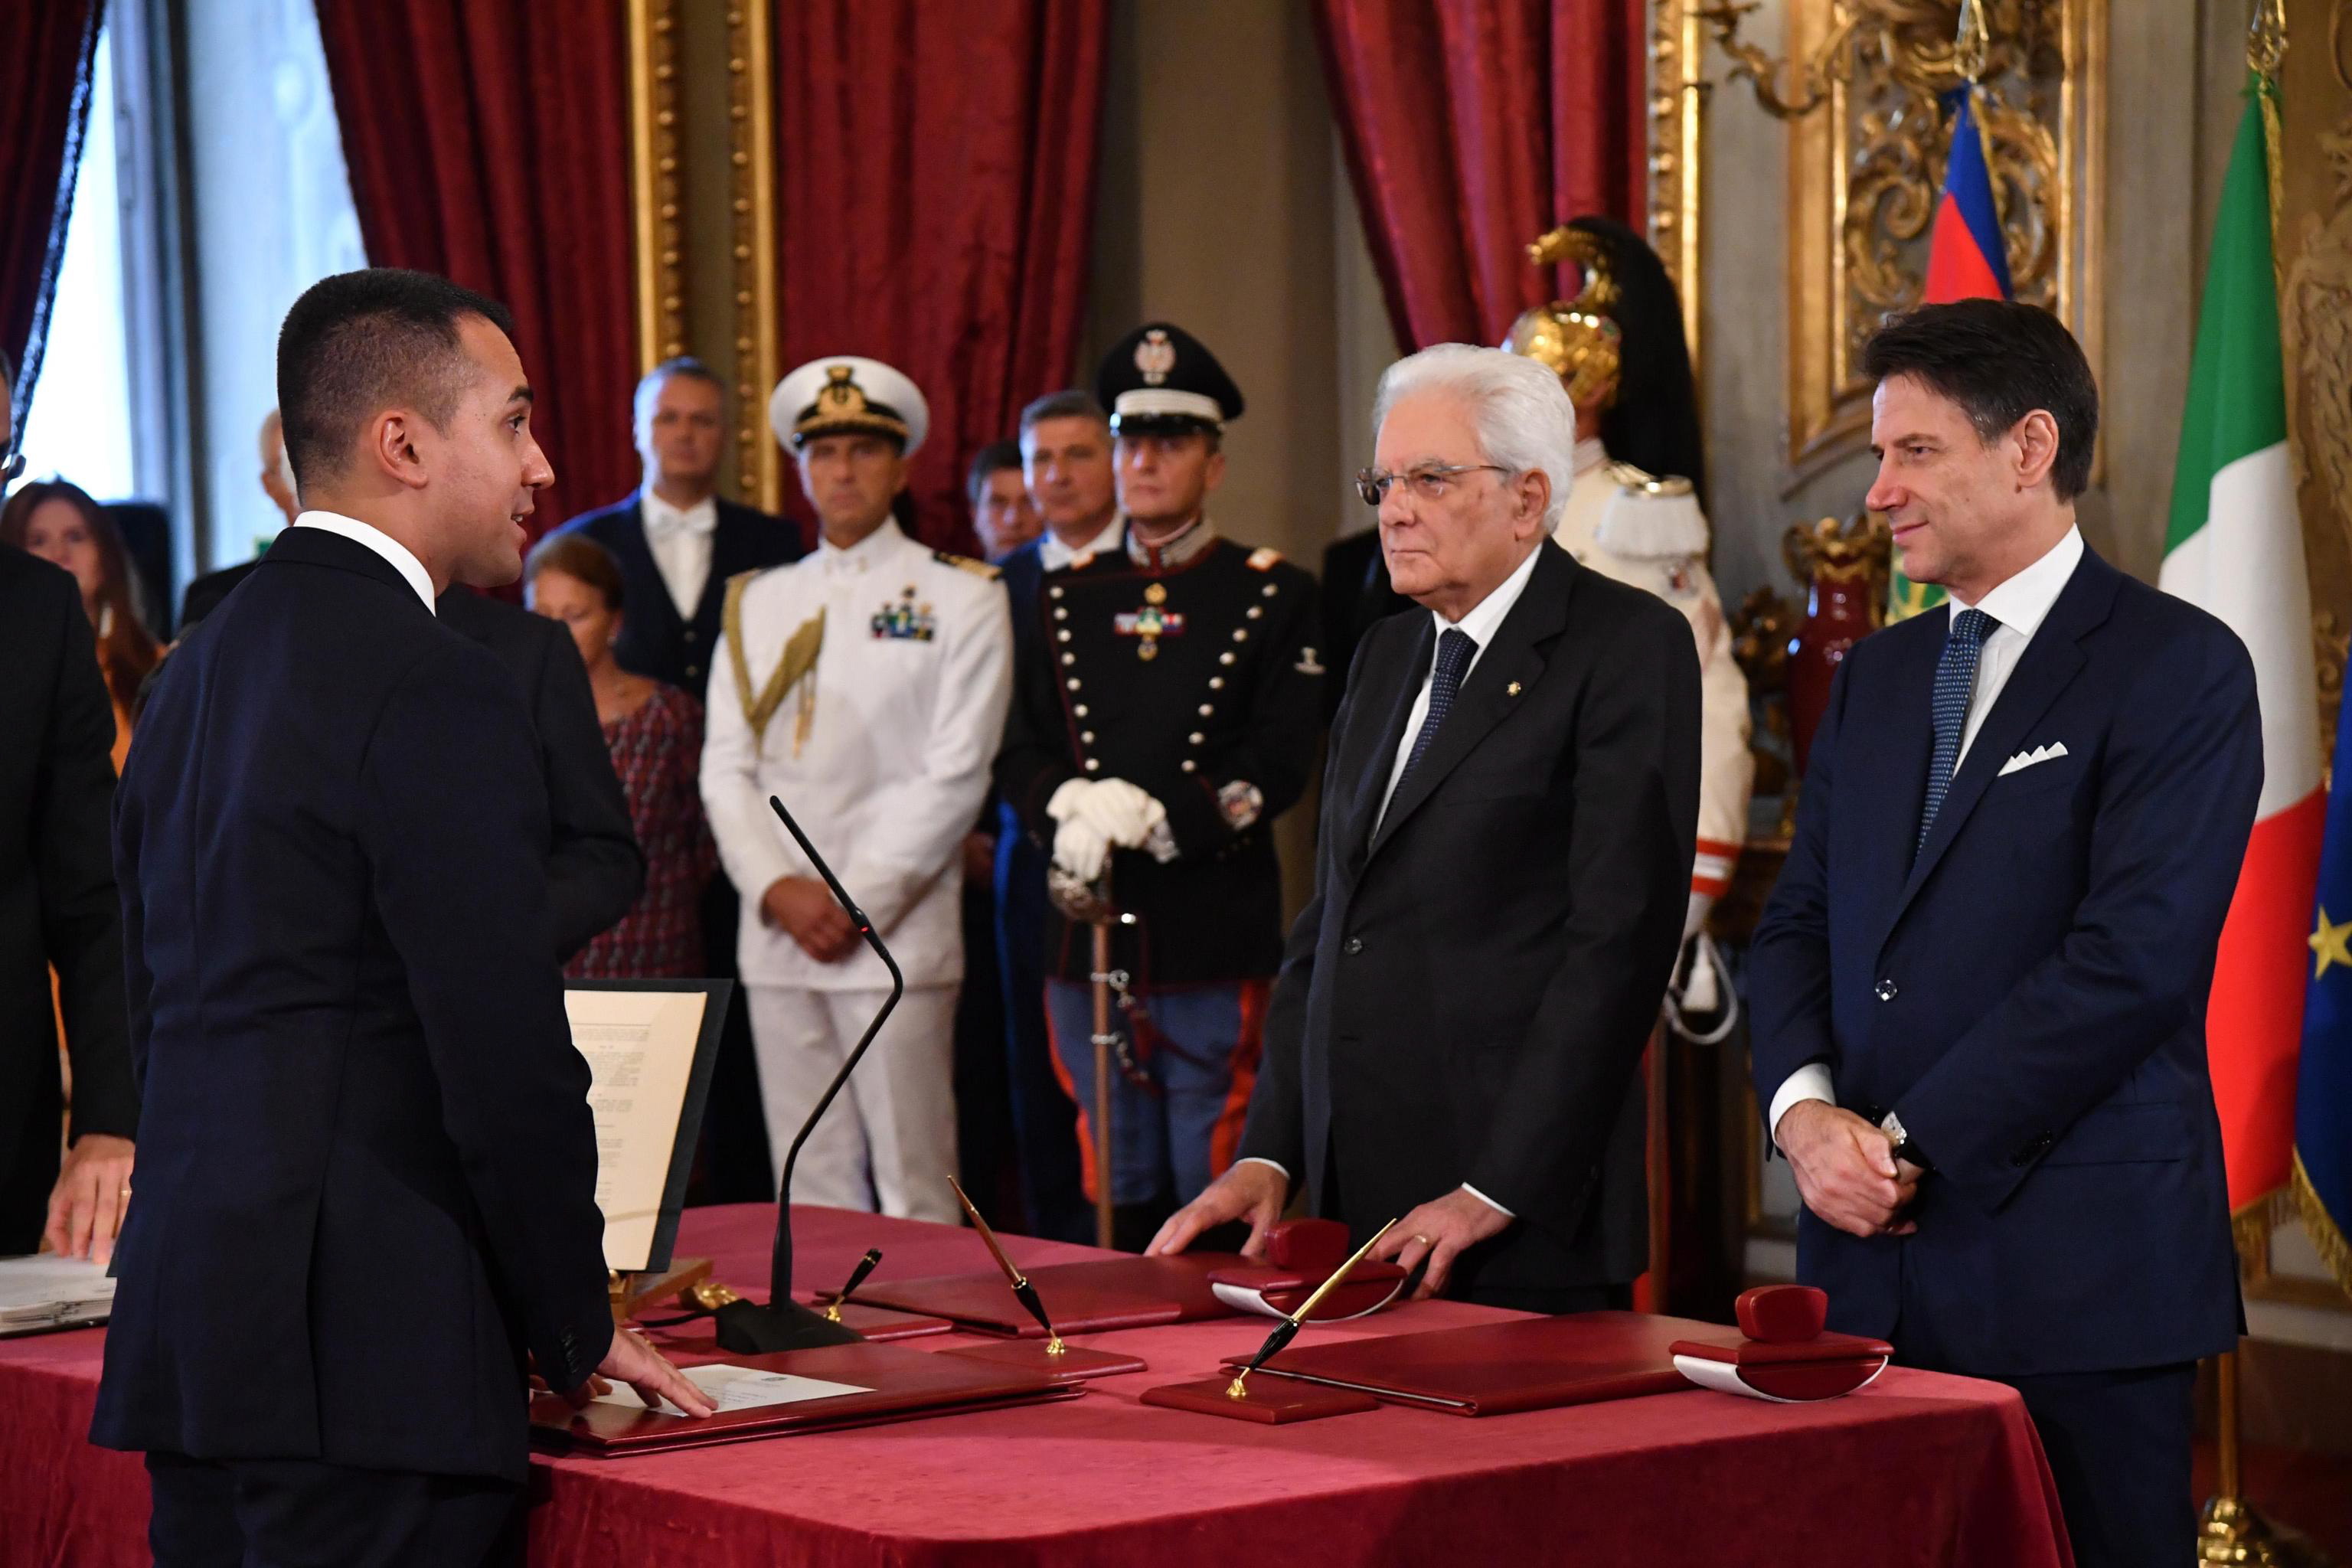 epa07818661 Italian Minister of Foreign Affairs Luigi Di Maio (L) stands in front of Italian Premier Giuseppe Conte (R) and President Sergio Mattarella (C) during the new government's swearing-in at Quirinal Palace, Rome, Italy, 05 September 2019. Italian Prime Minister Giuseppe Conte's new government is a coalition between the anti-establishment 5-Star Movement (M5S) and the center-left Democratic Party (PD) that will have 21 ministers, 10 from the M5S, nine from the PD and one from the small leftwing Free and Equal (LeU) party, media reported.  EPA/ALESSANDRO DI MEO